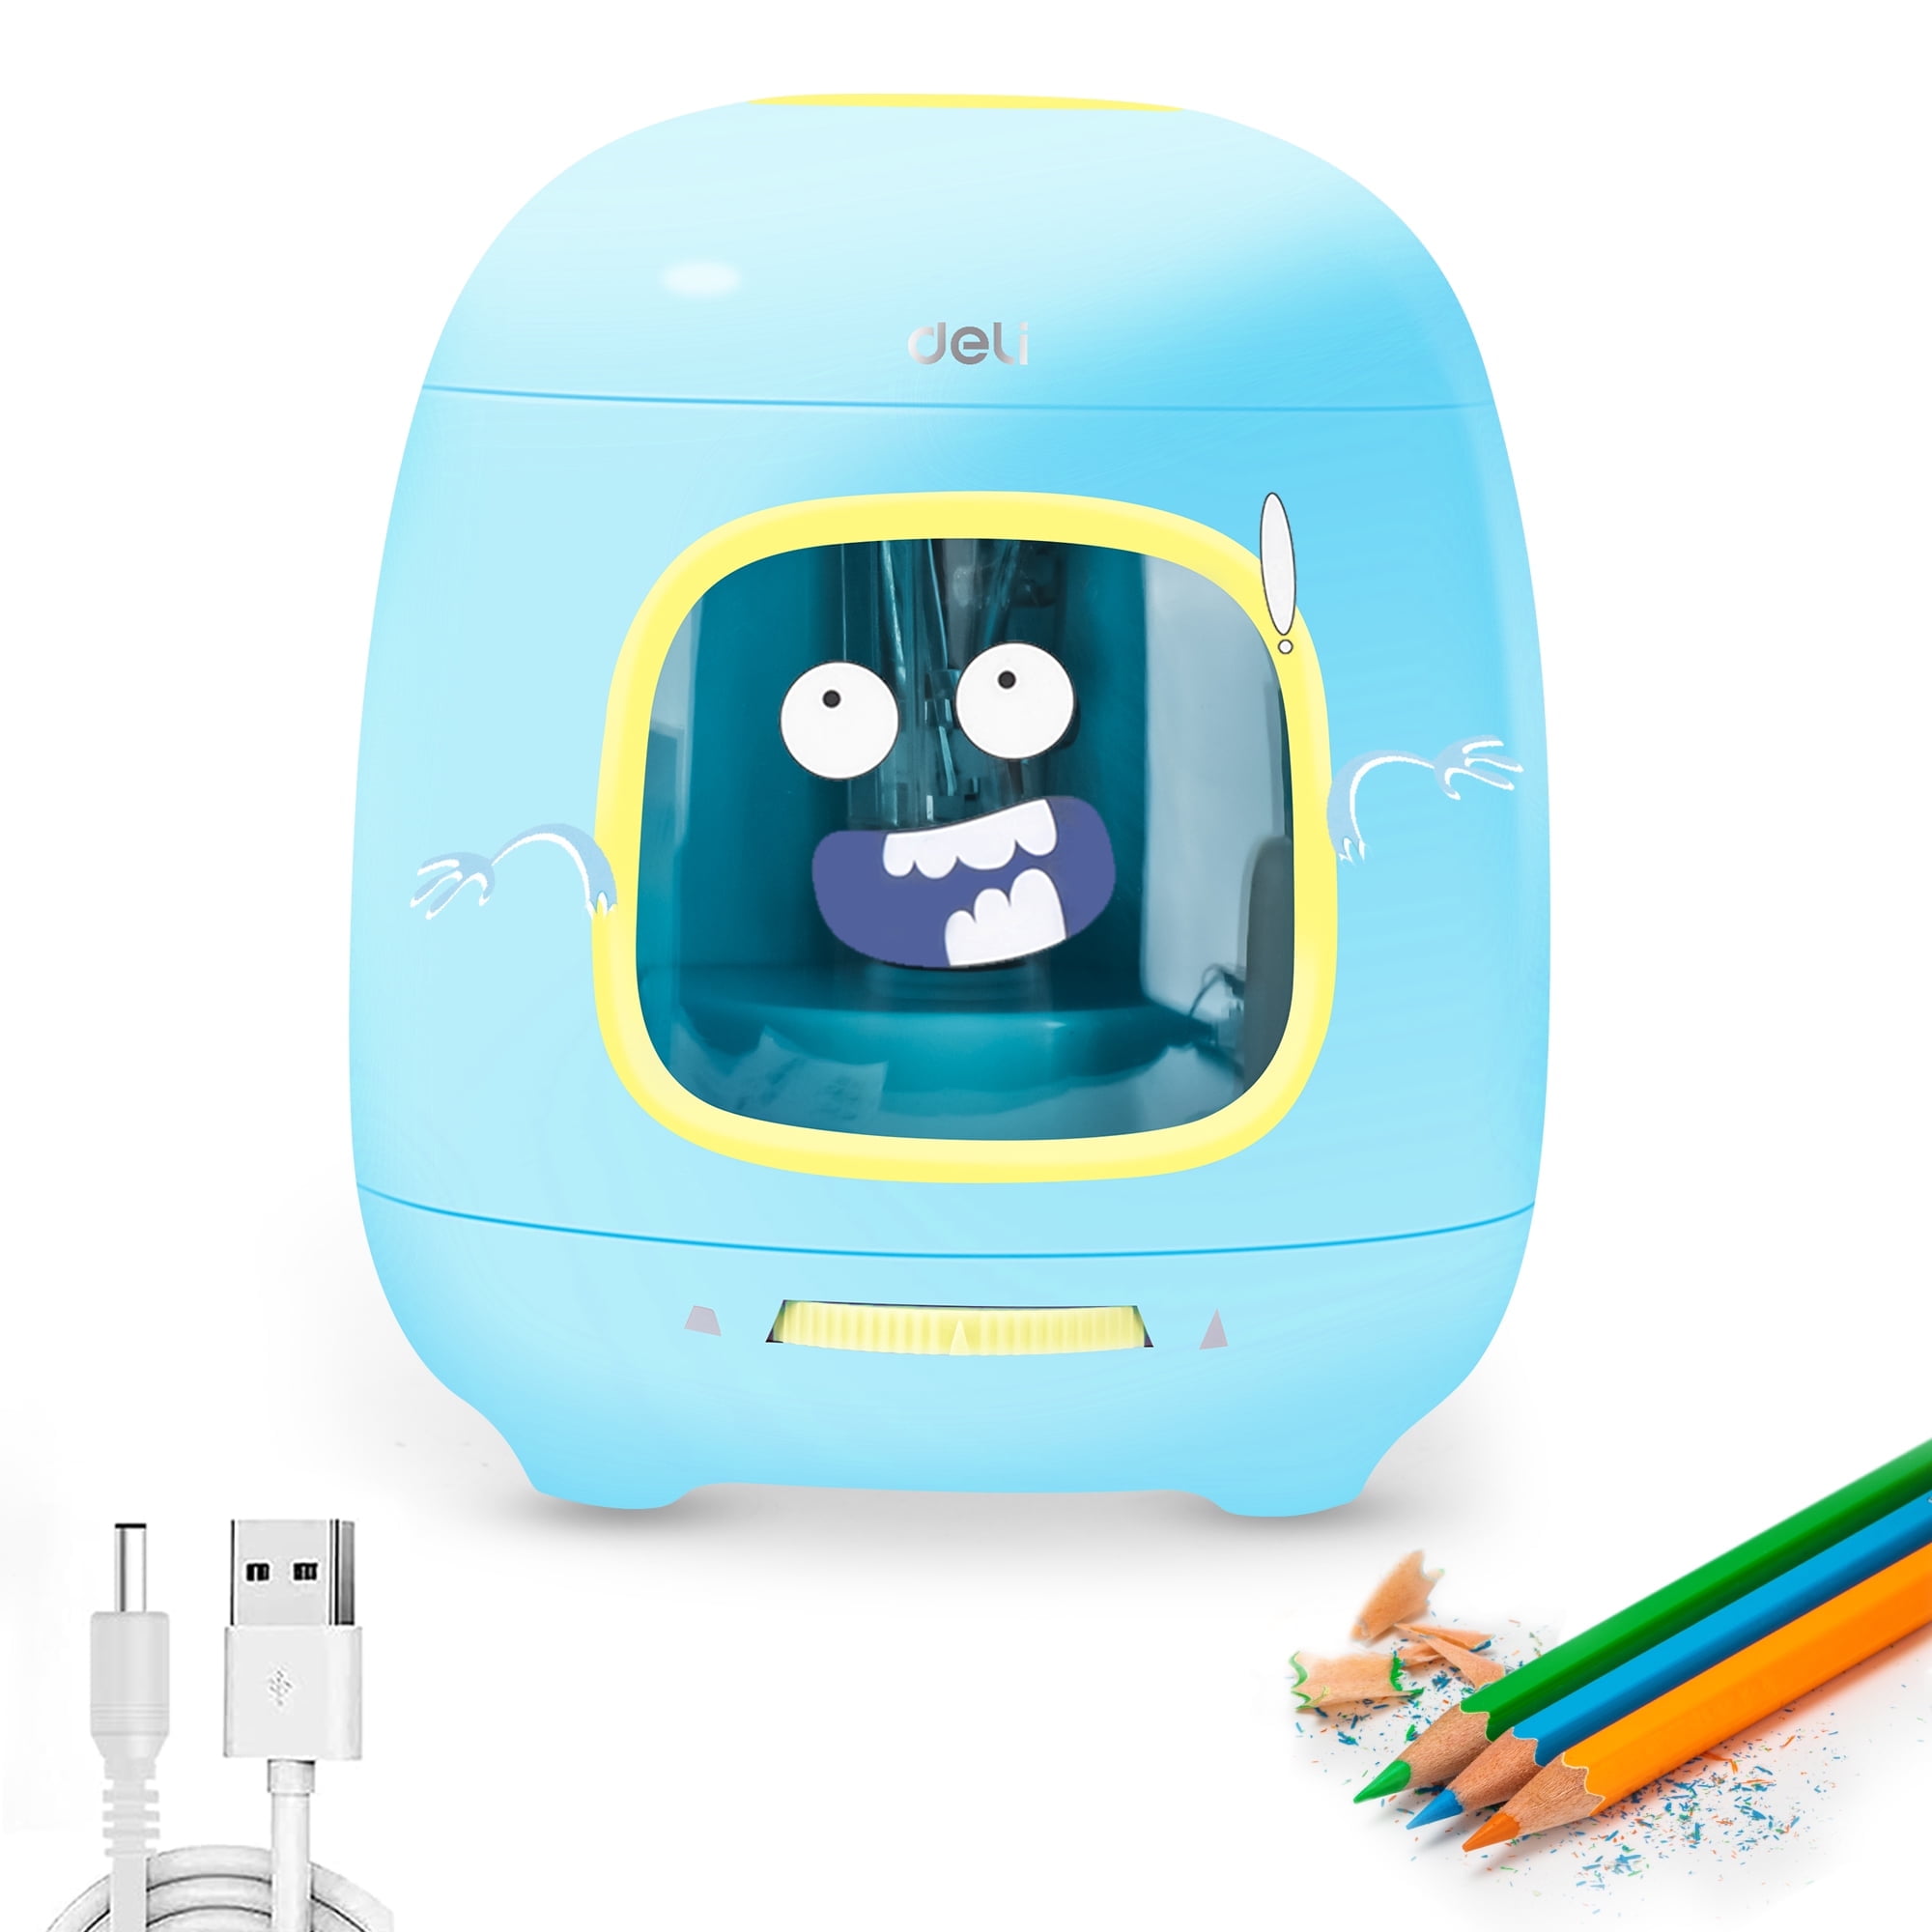 Deli Electric Pencil Sharpener,Suitable for No.2 Pencils Colored Pencils, USB & Battery Operated, Blue